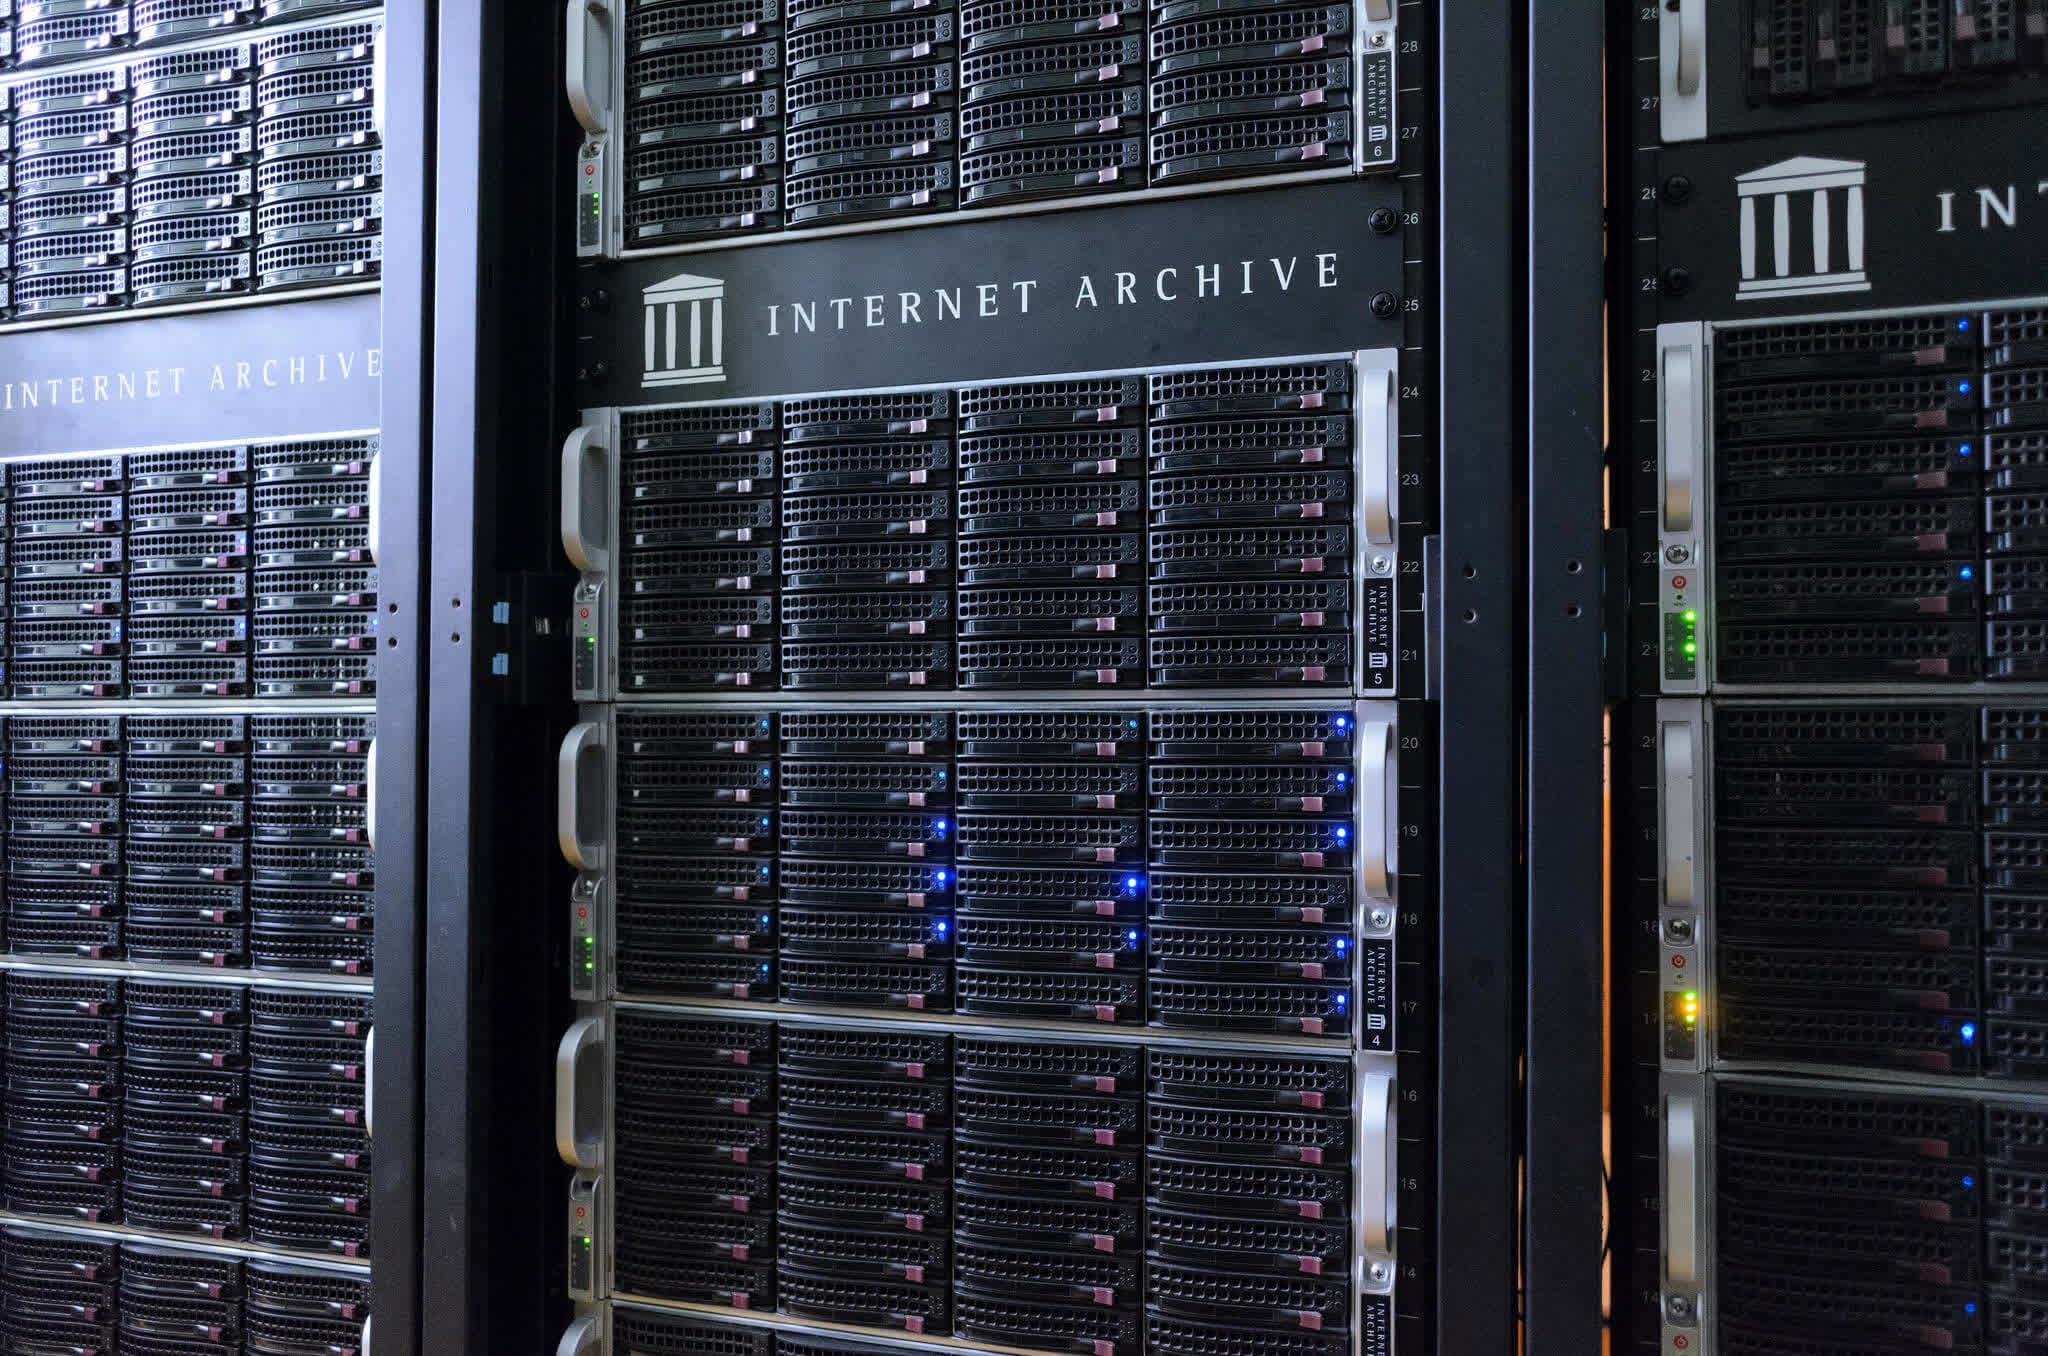 The Internet Archive is struggling to preserve the web thanks to walled gardens and pay sites